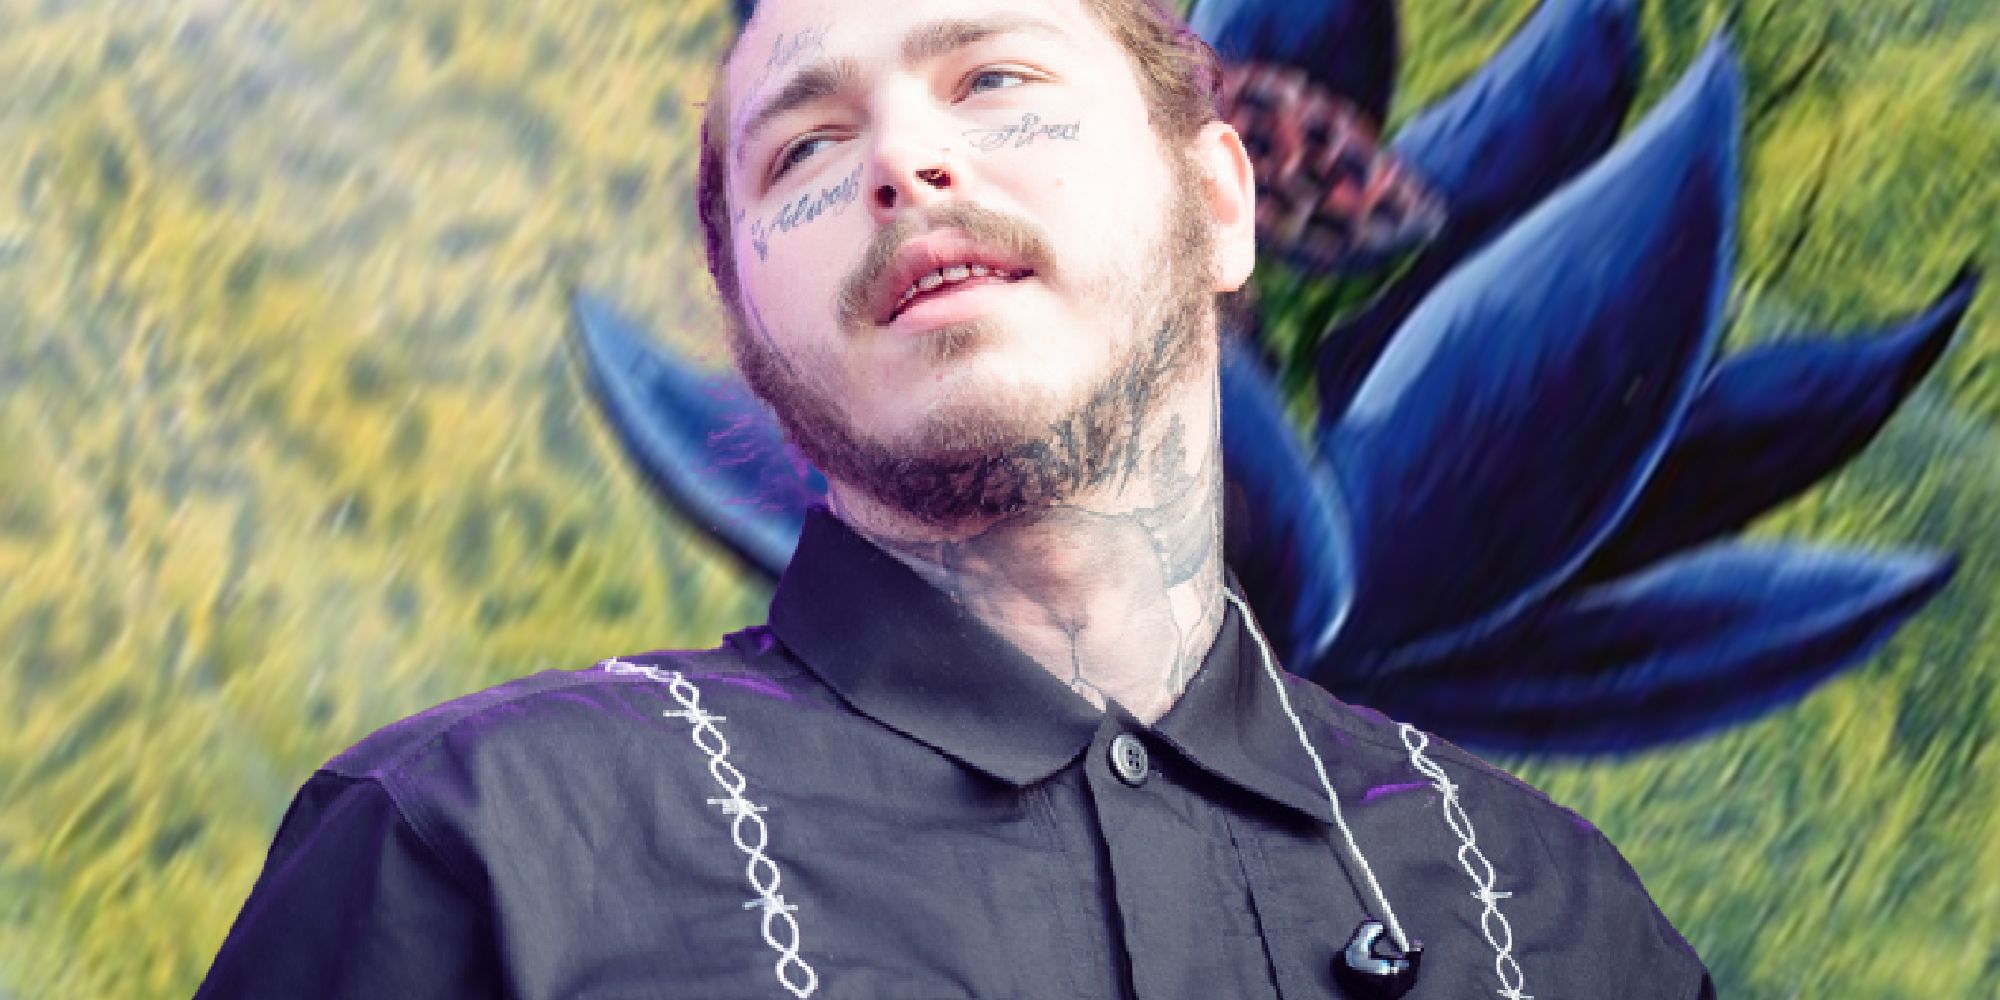 Post Malone Spent $800,000 MTG's Most Card